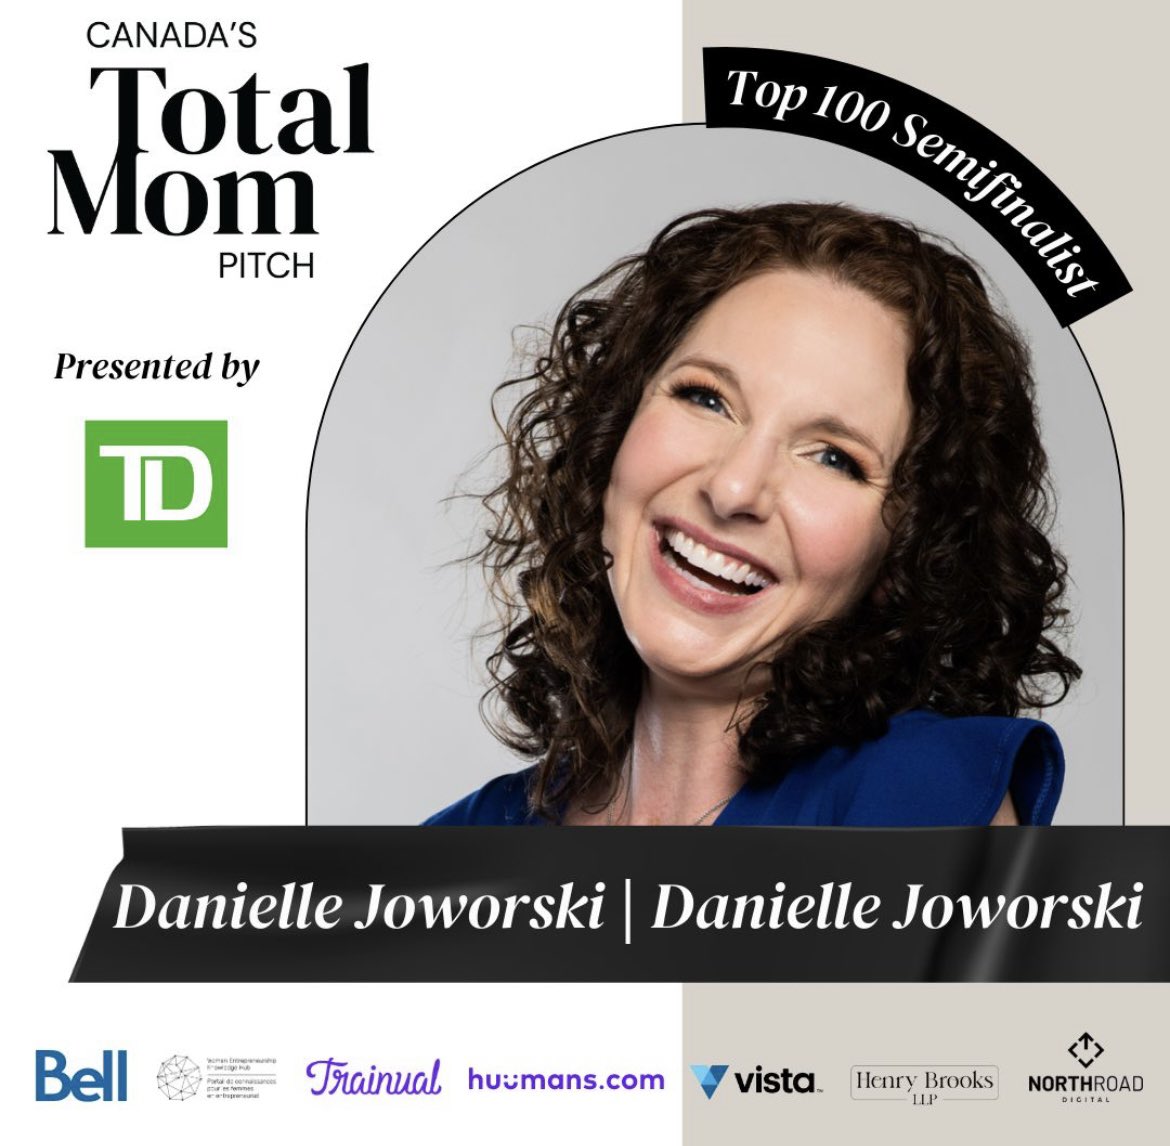 Elevating the voices & presence women with the support of @totalmominc!

Excited to share I’ve been selected from almost 1,000 entries from across Canada as a Top 100 Semi-Finalist in the #totalmompitch presented by TD.

Thank you Total Mom Inc for this opportunity!